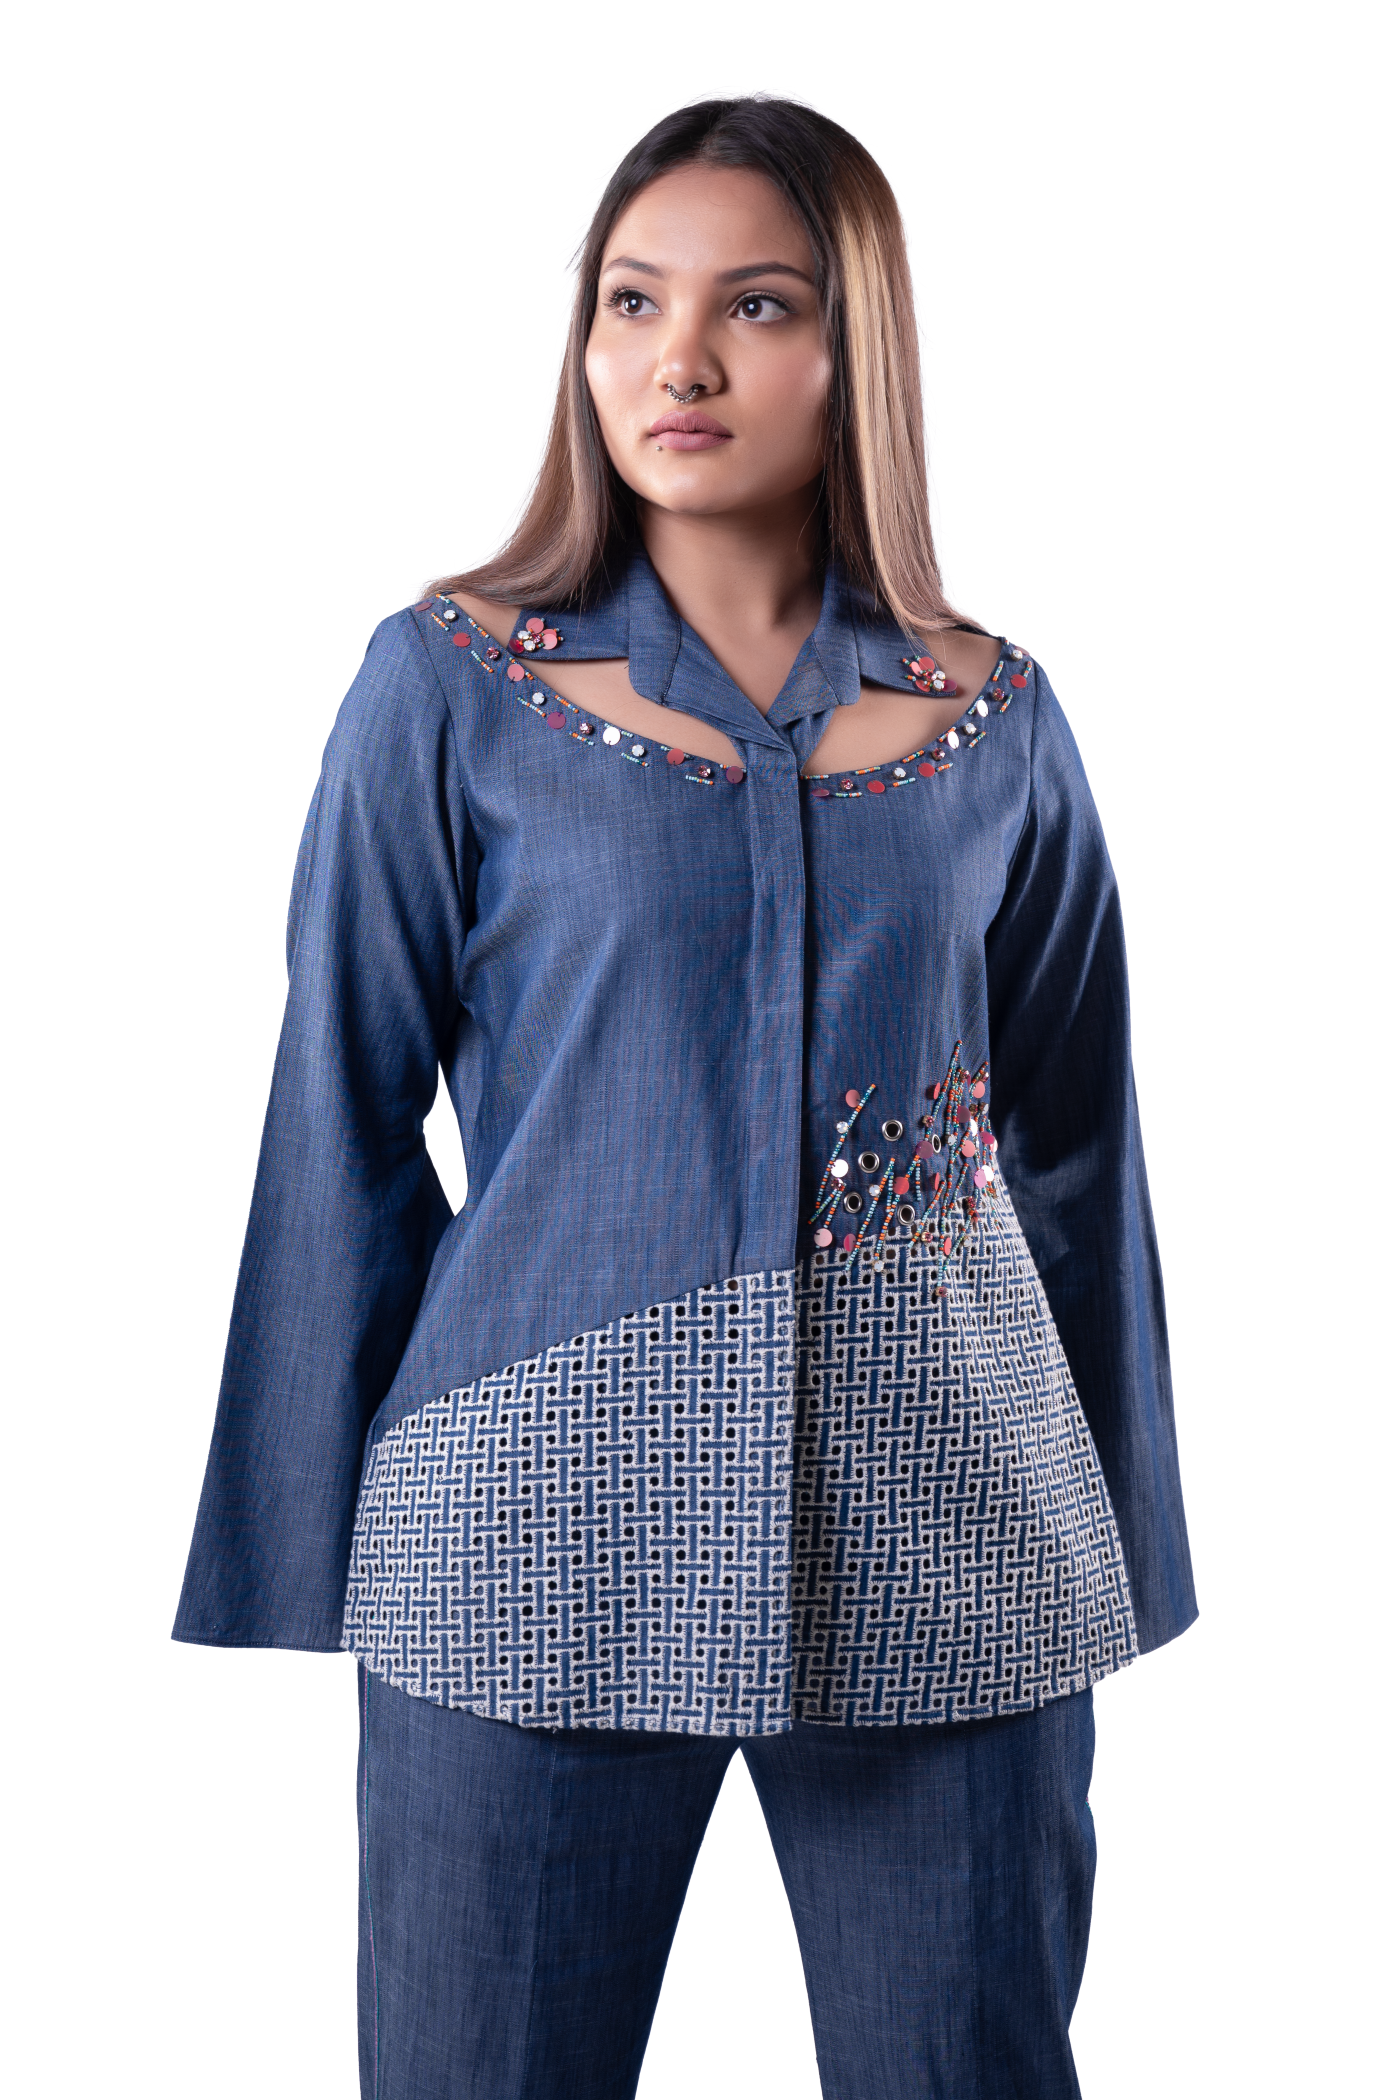 Blue denim Co-ord Set of an embellished shirt with cut out and patchwork details. Paired with matching fitted pants